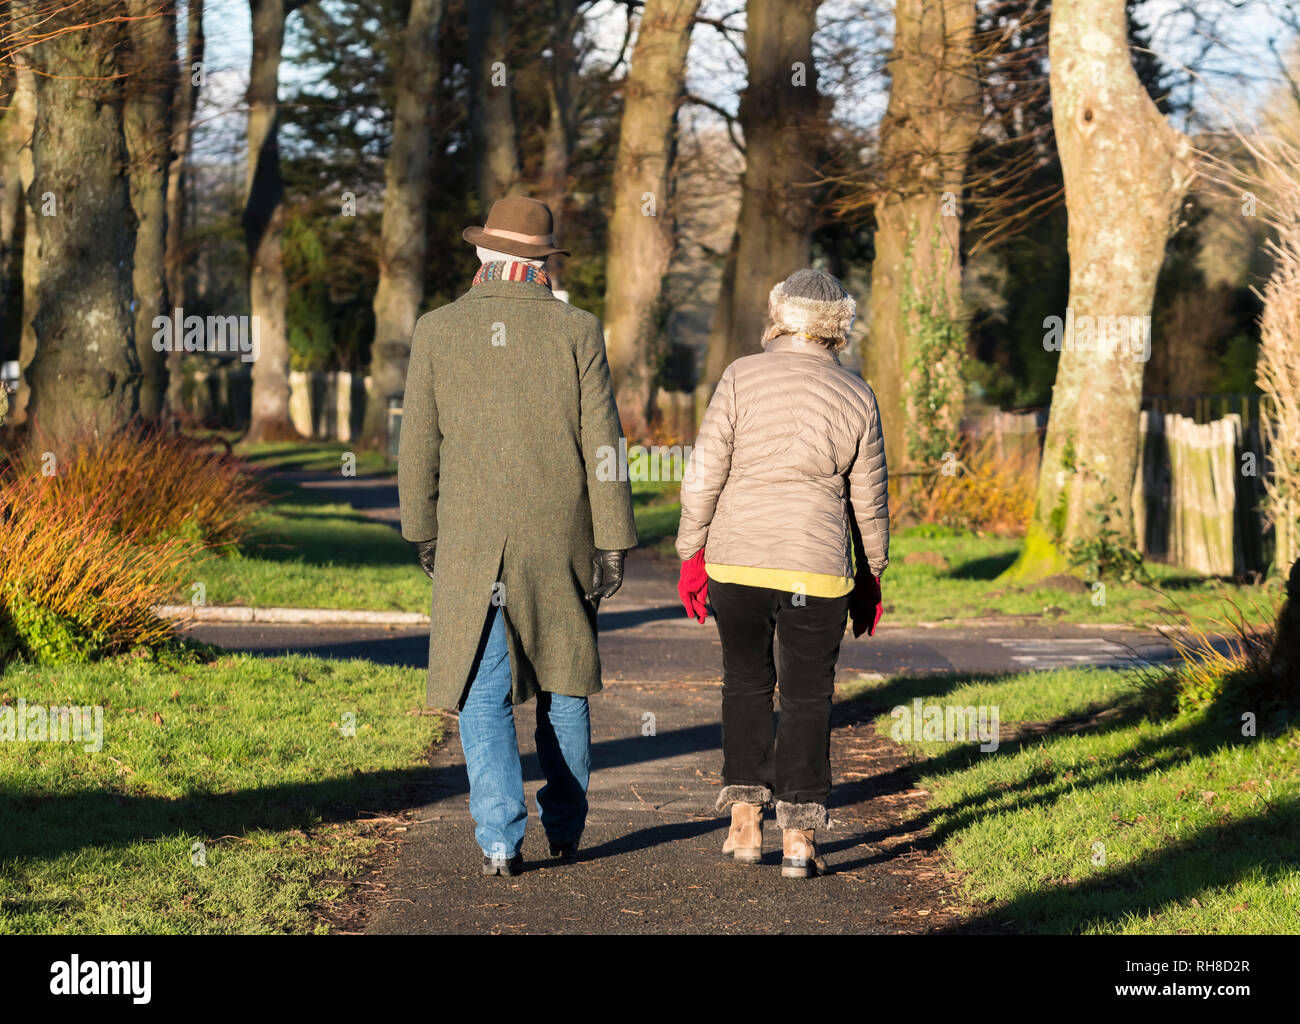 Middle aged or senior couple dressed in warm Winter clothing with scarf and hat walking together on a country path in Winter in the UK. Stock Photo